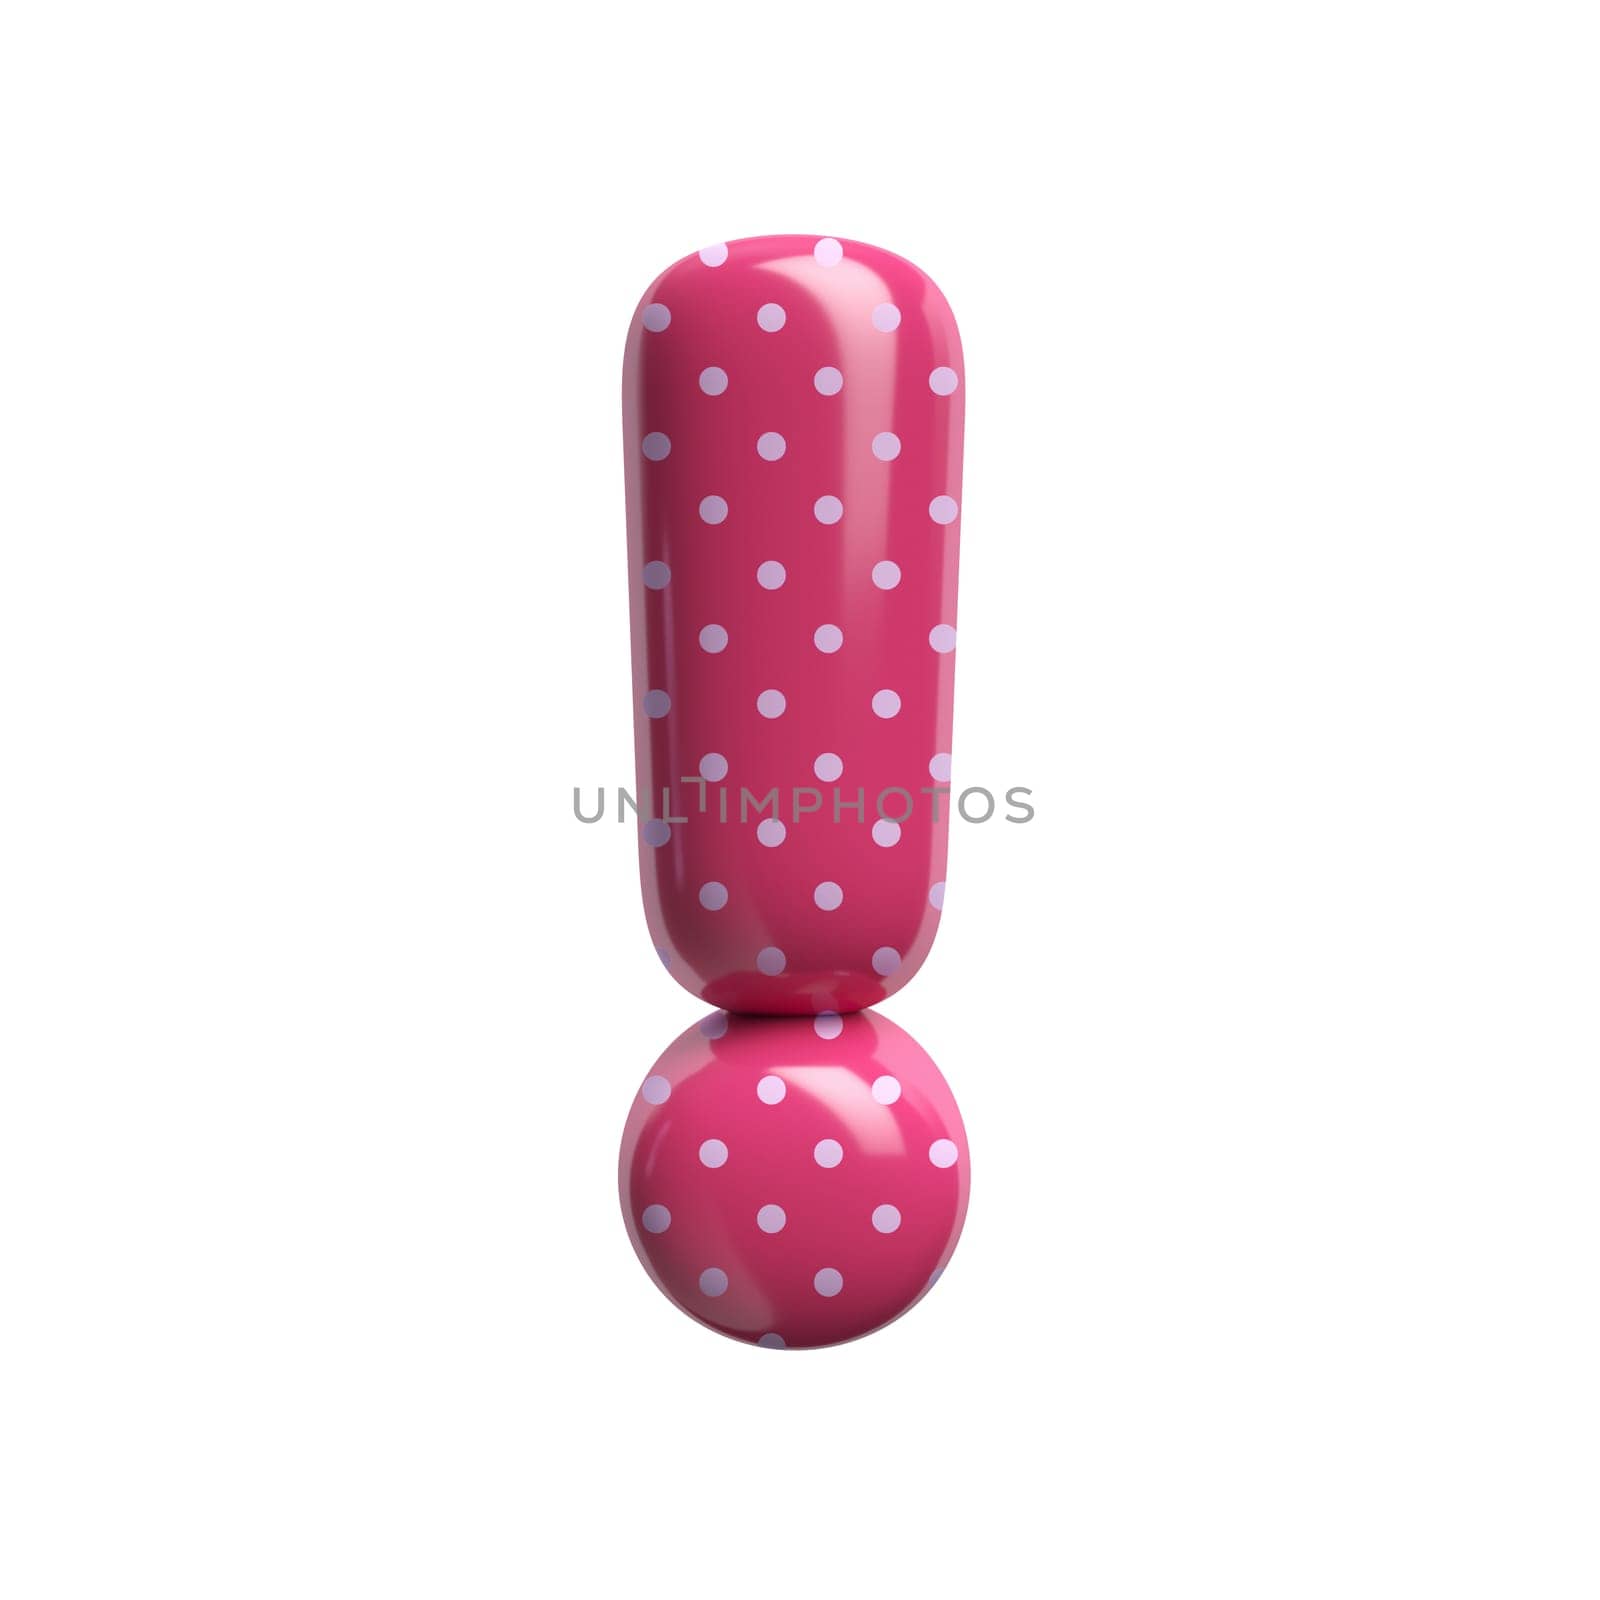 Polka dot exclamation point - 3d pink retro symbol - Suitable for Fashion, retro design or decoration related subjects by chrisroll